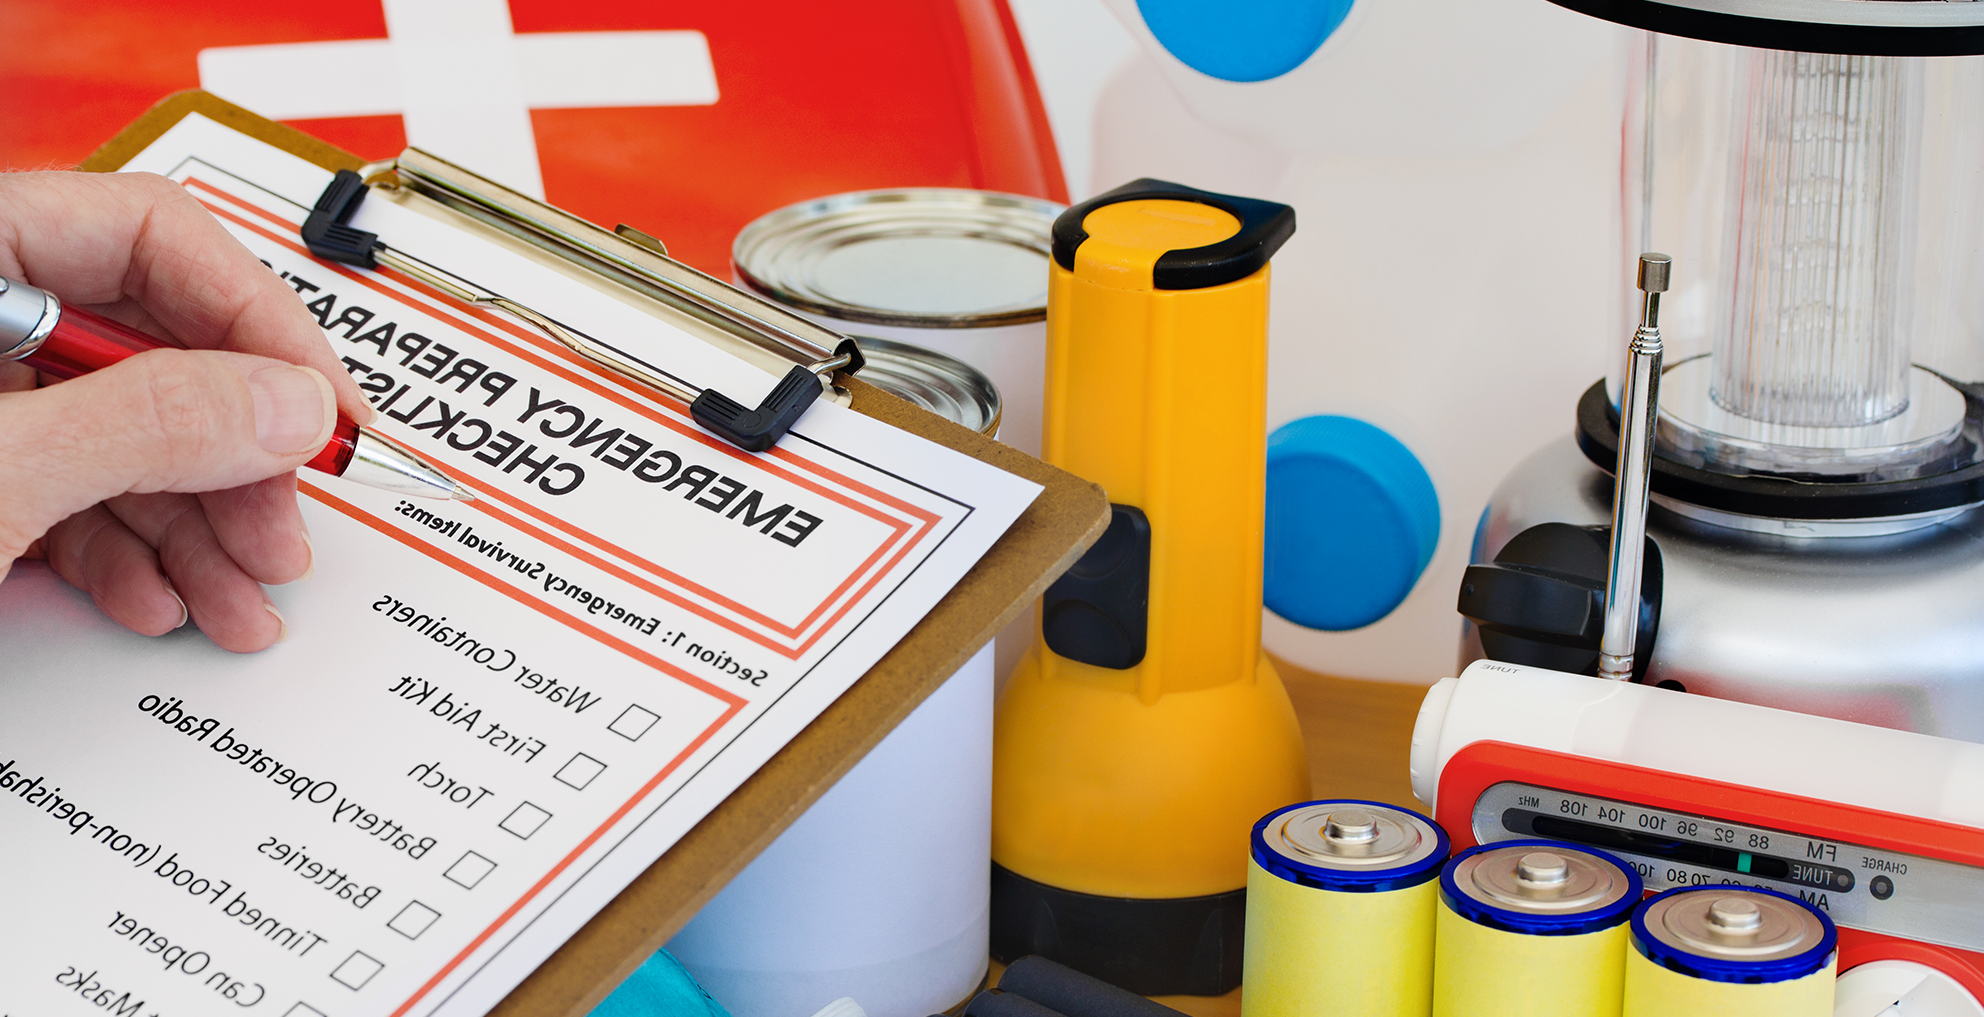 Preparing for emergencies with checklist and supplies